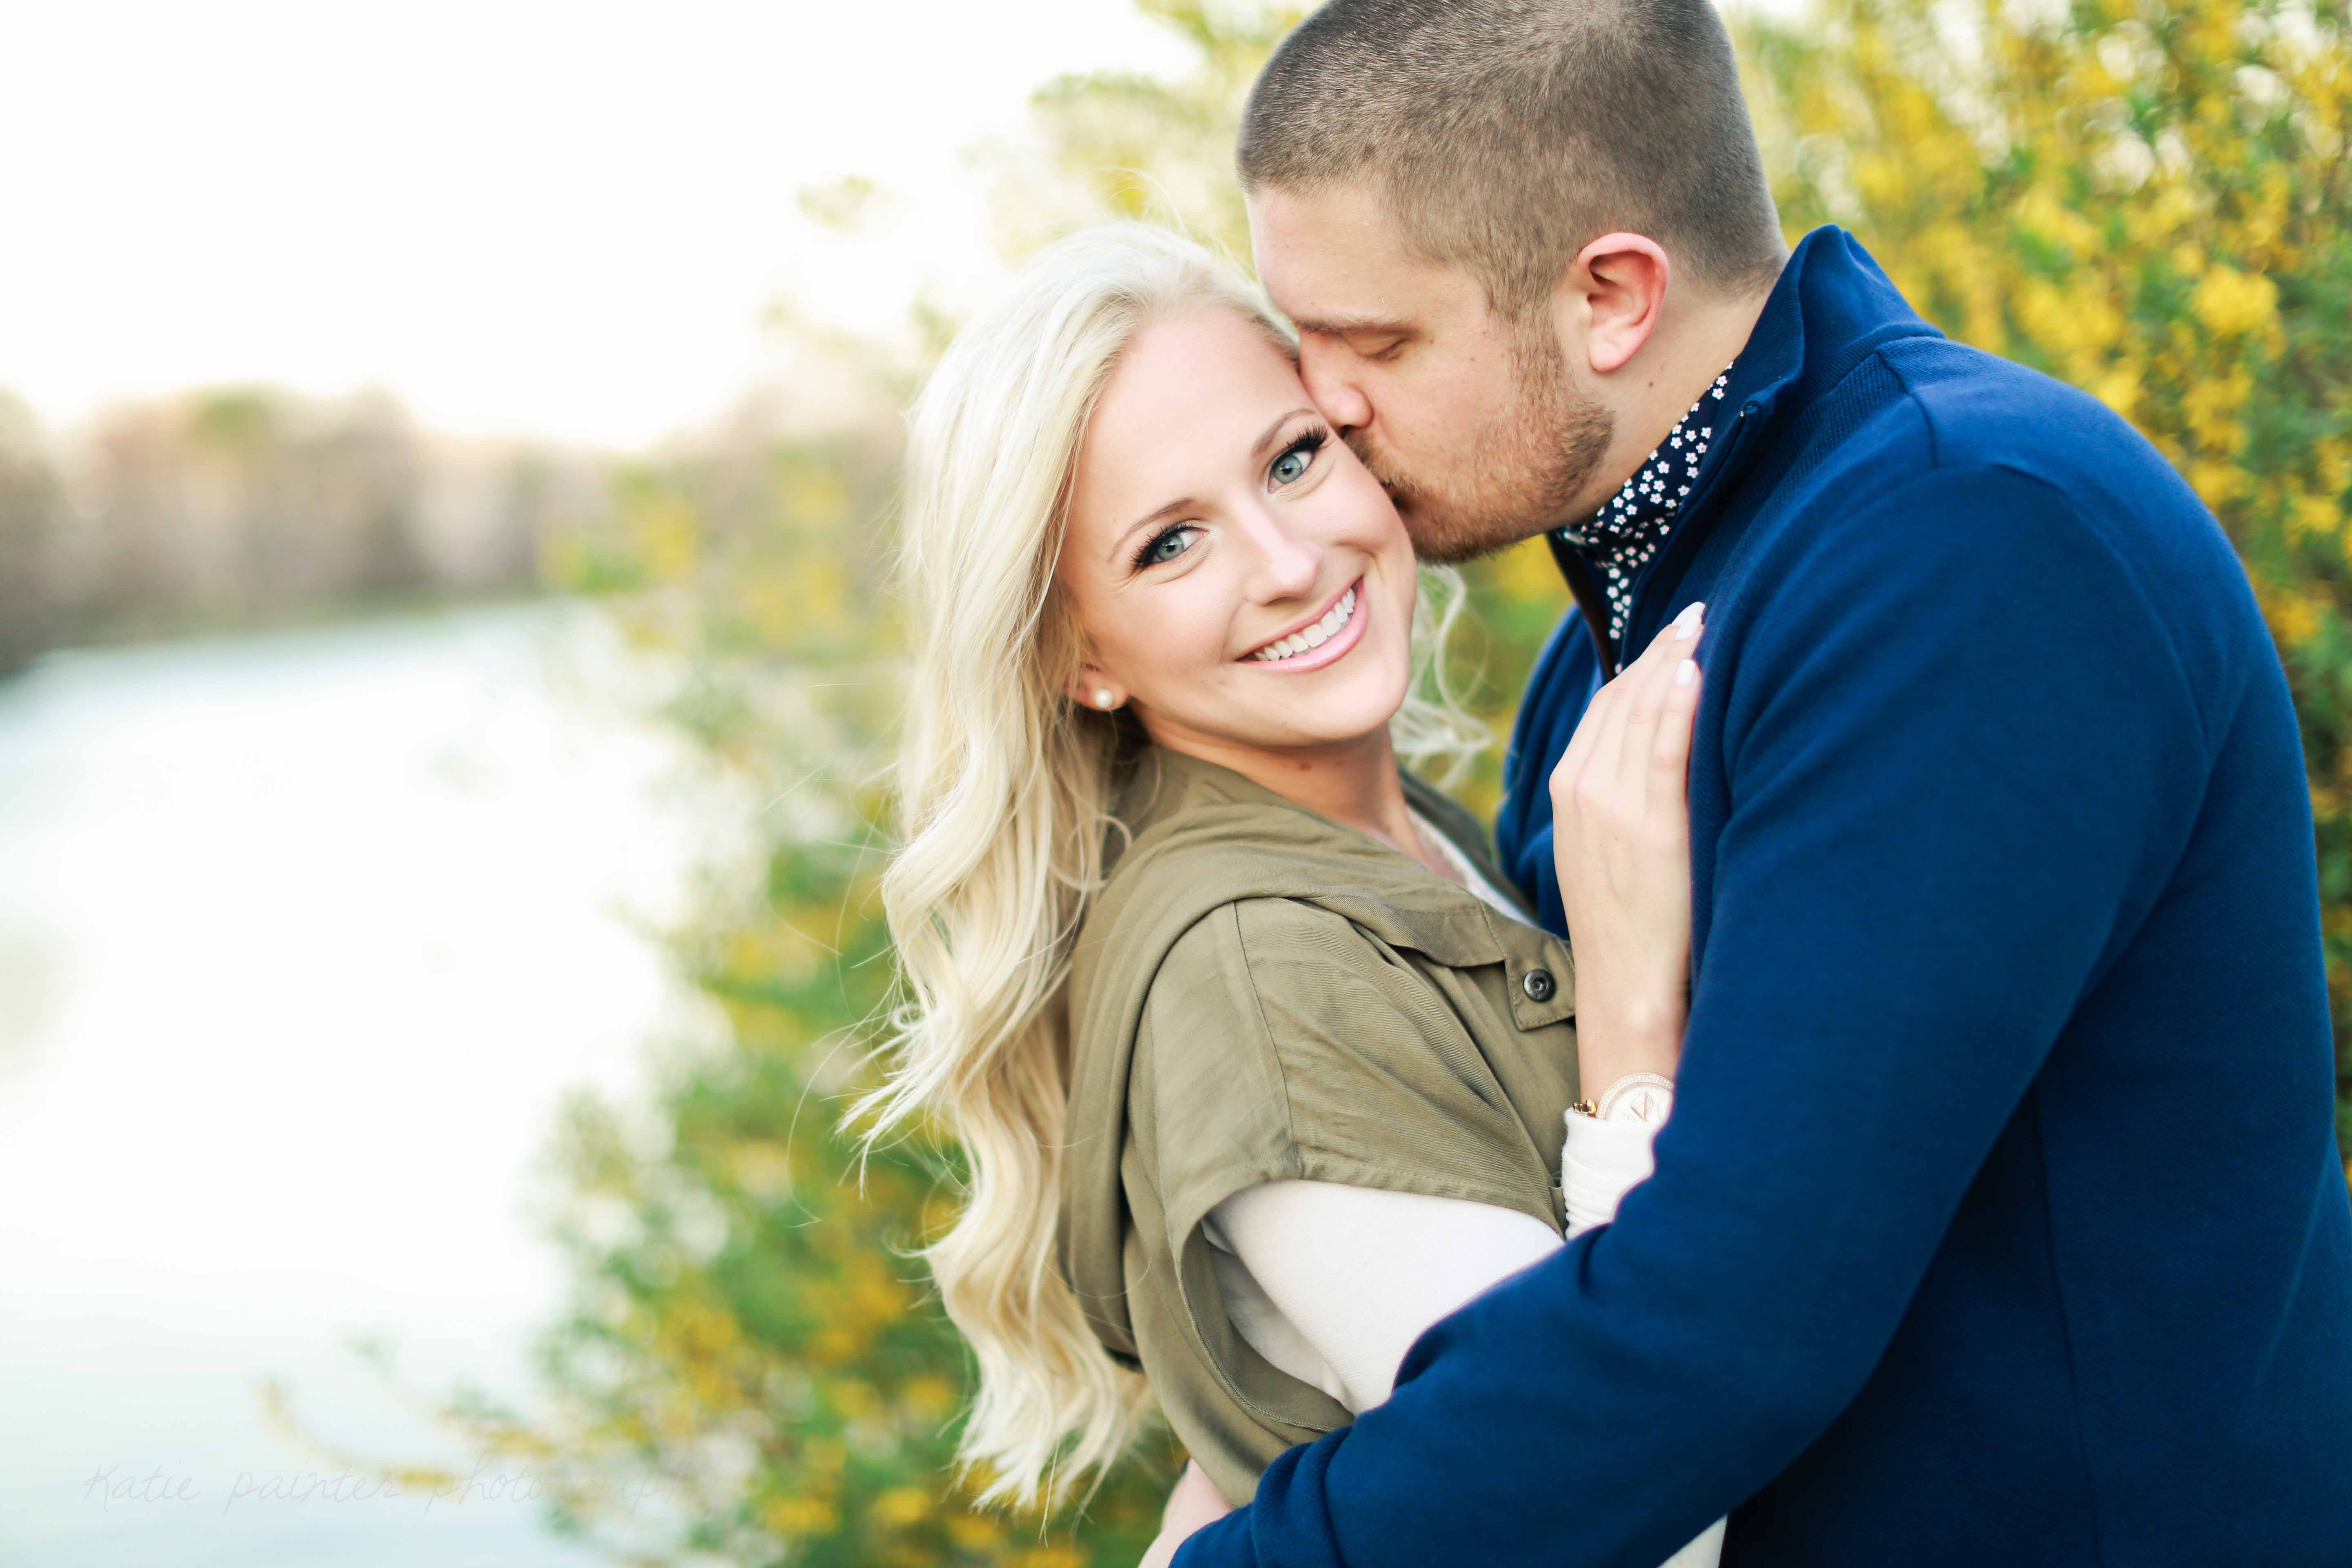 katie + kendall | engaged! » Katie Painter Photography